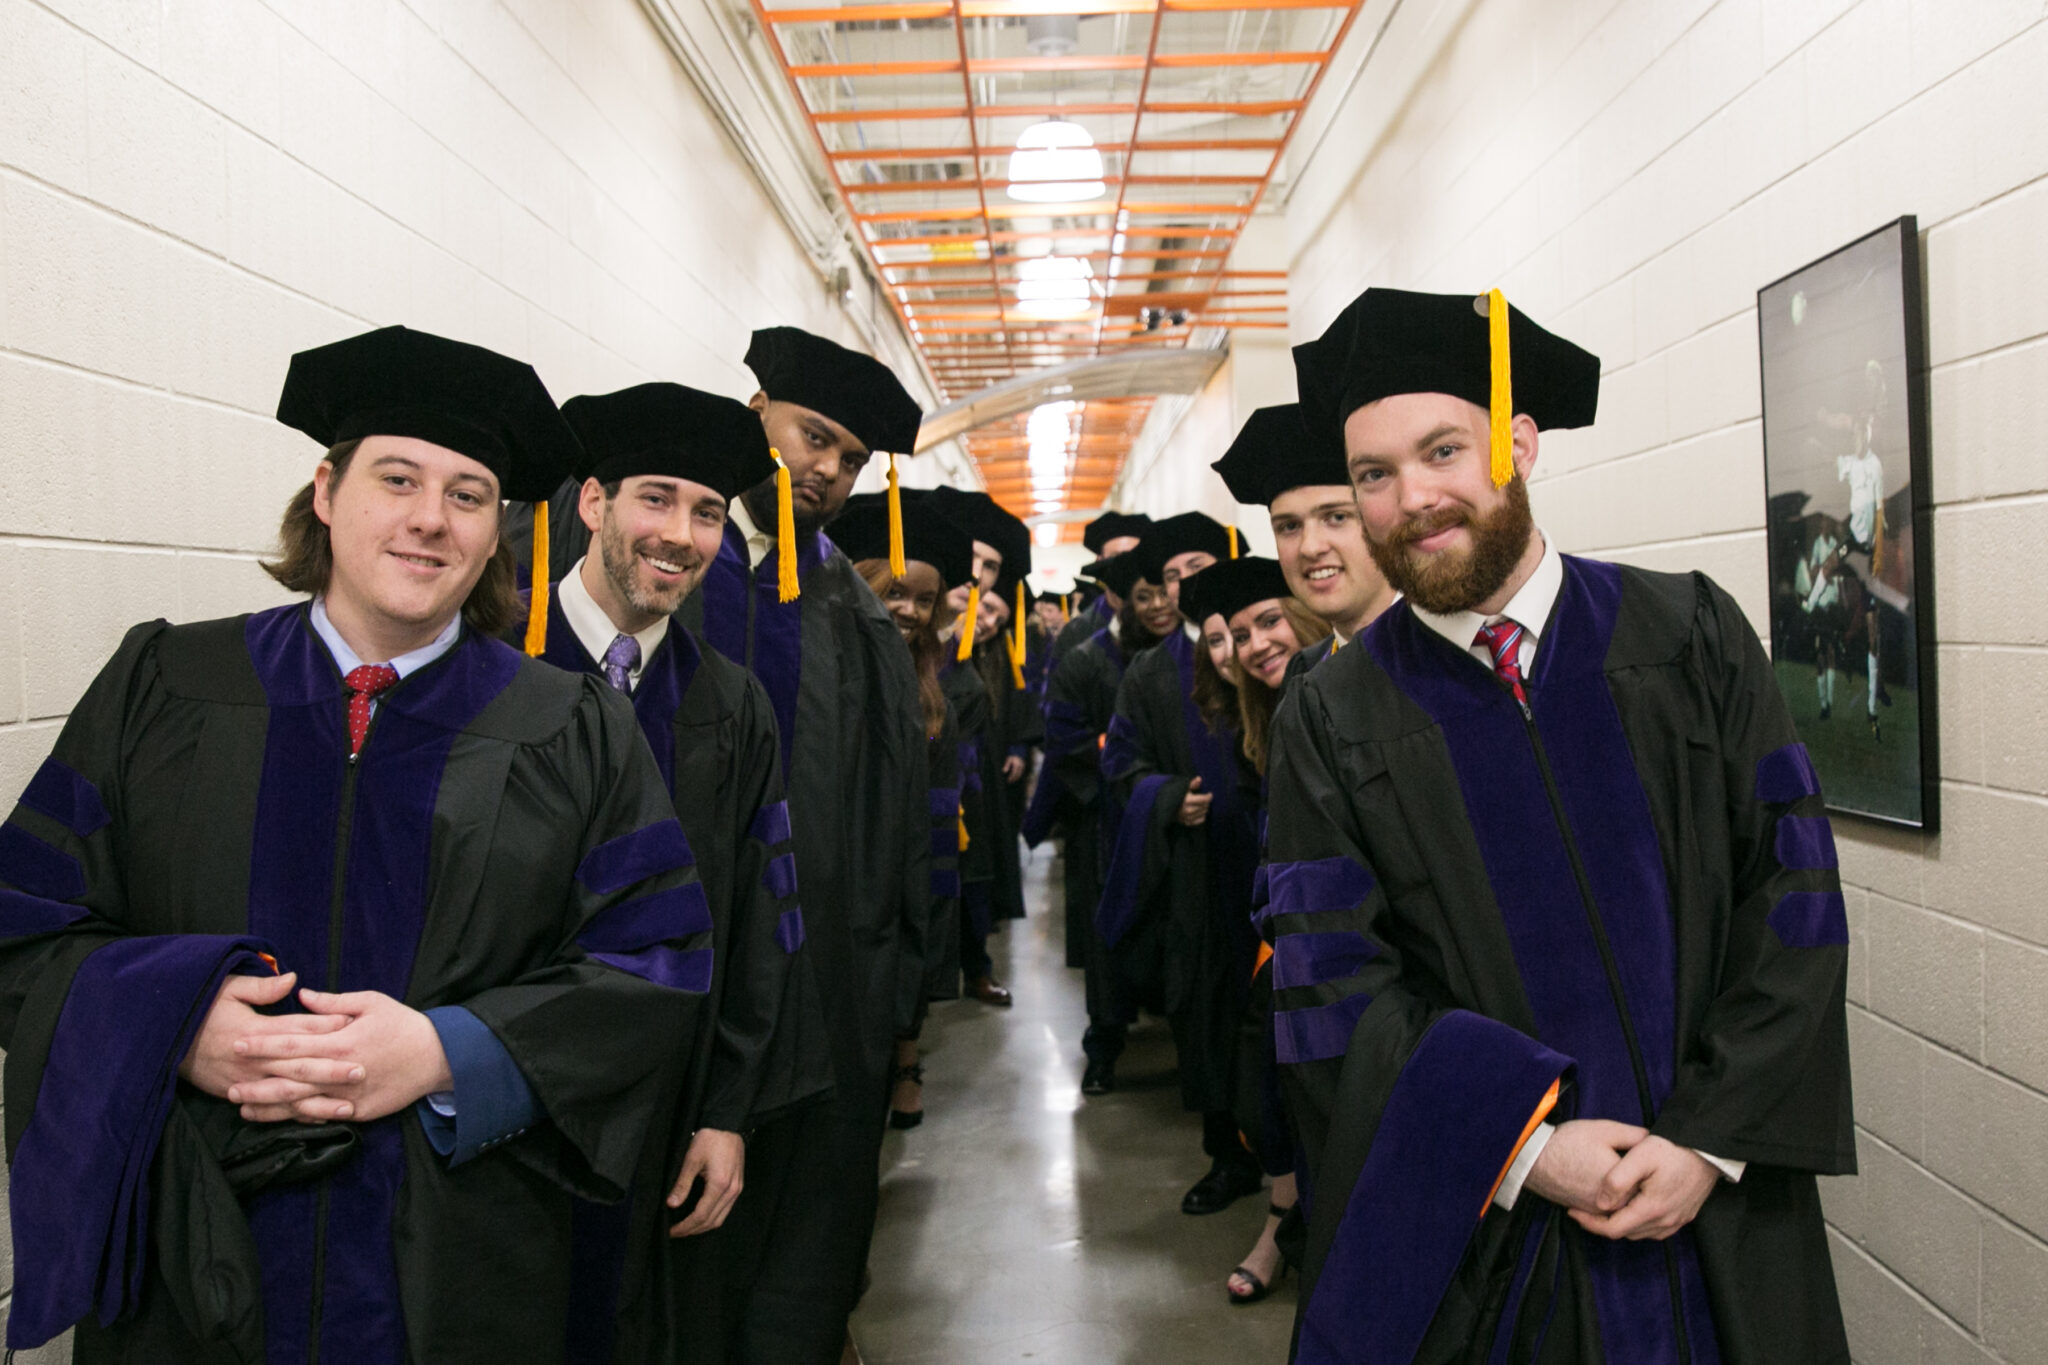 Group of students in a hallway, wearing graduation regalia